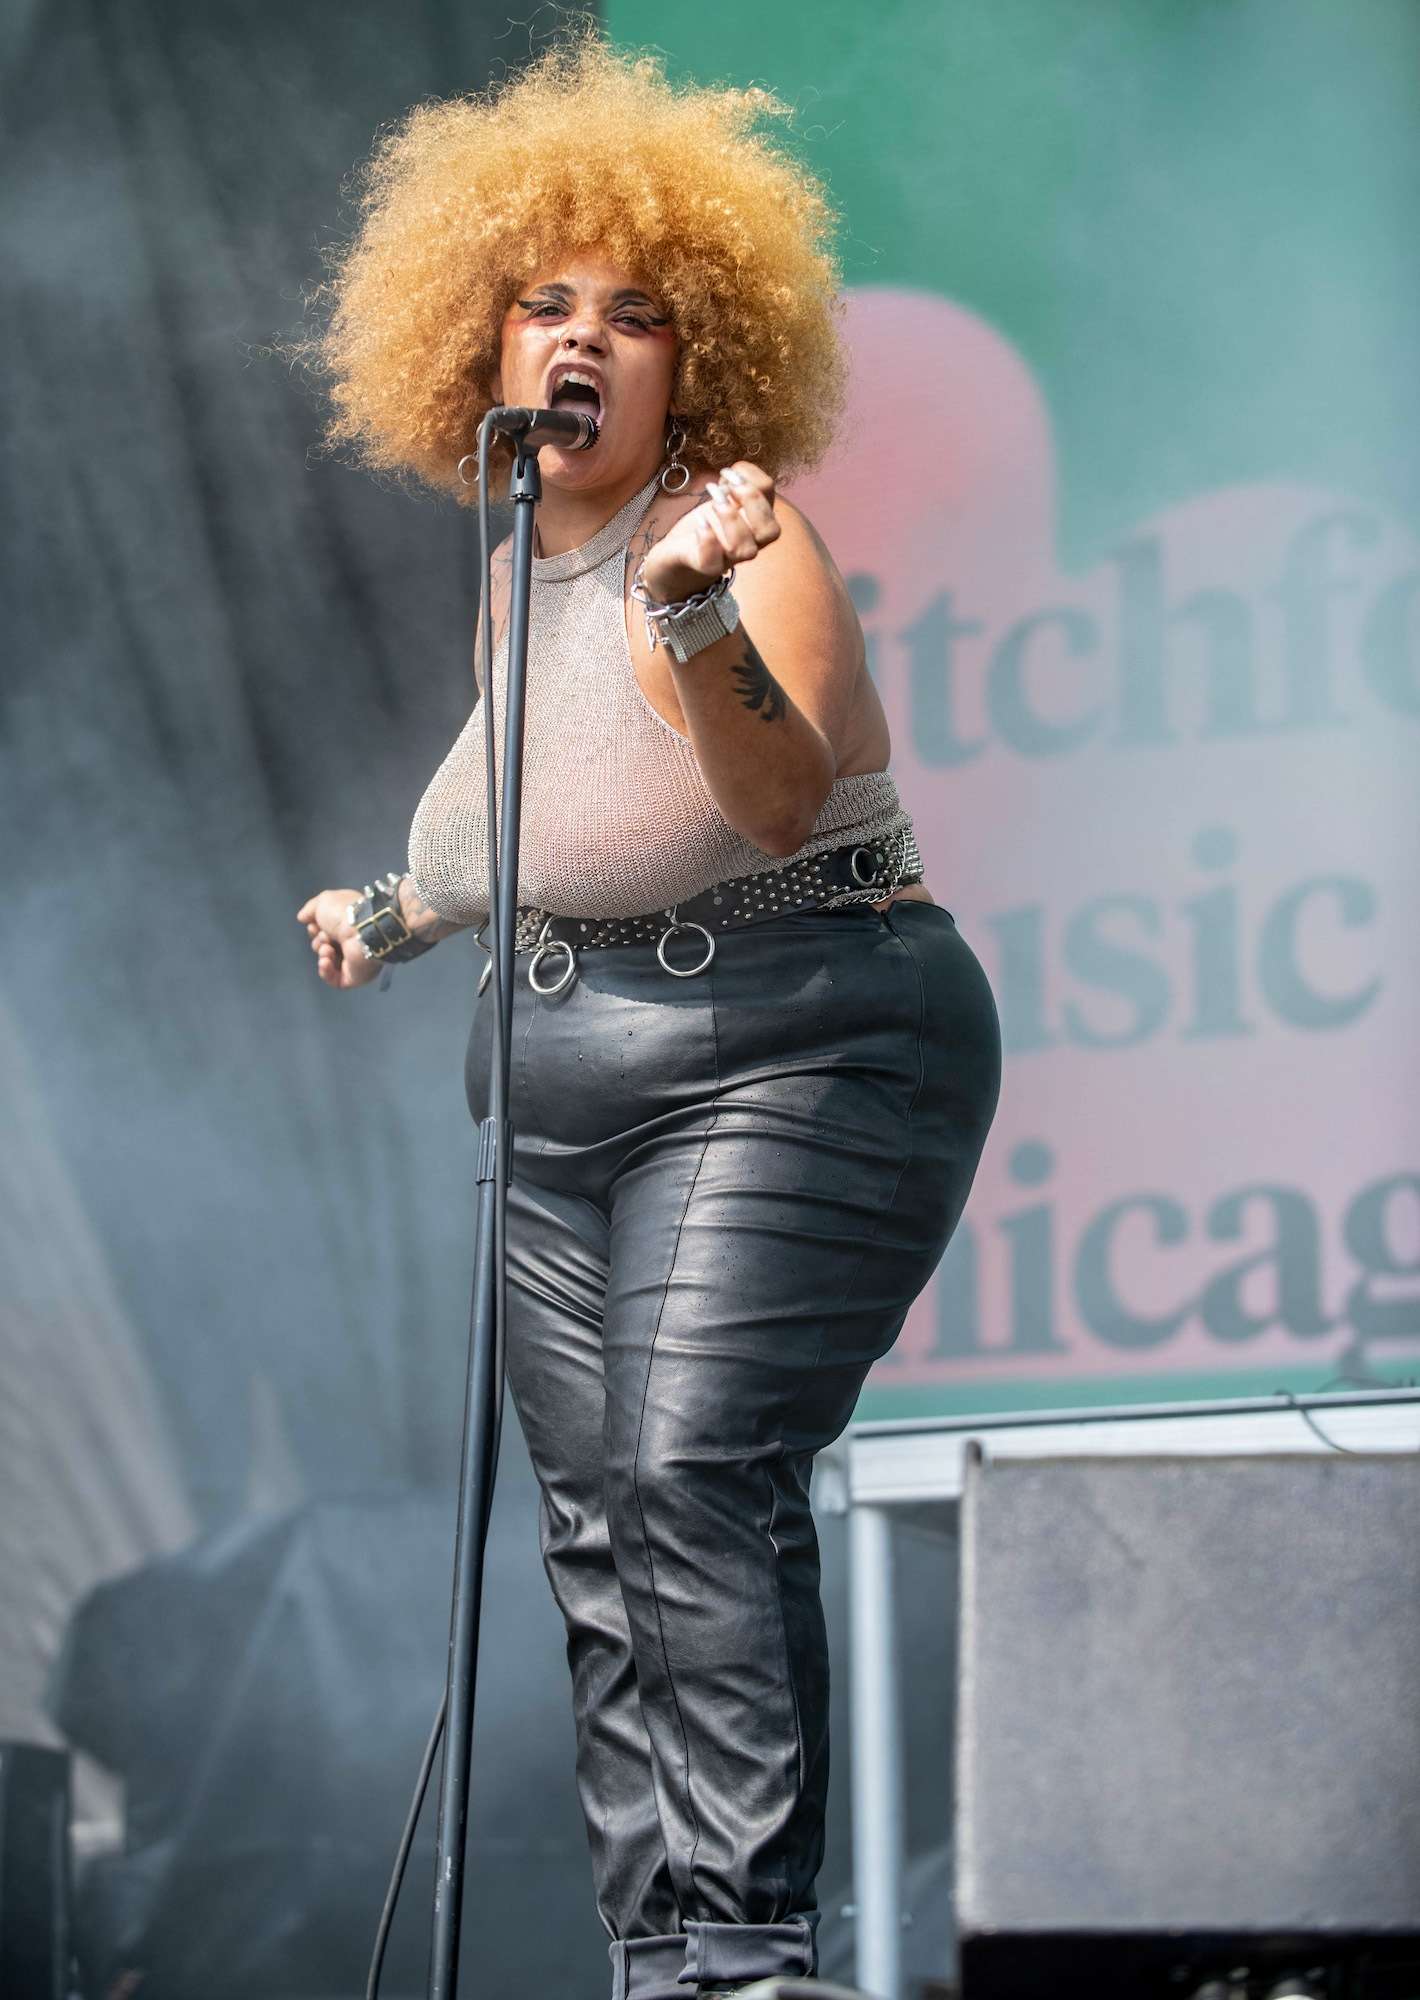 Special Interest Live at Pitchfork [GALLERY] 12